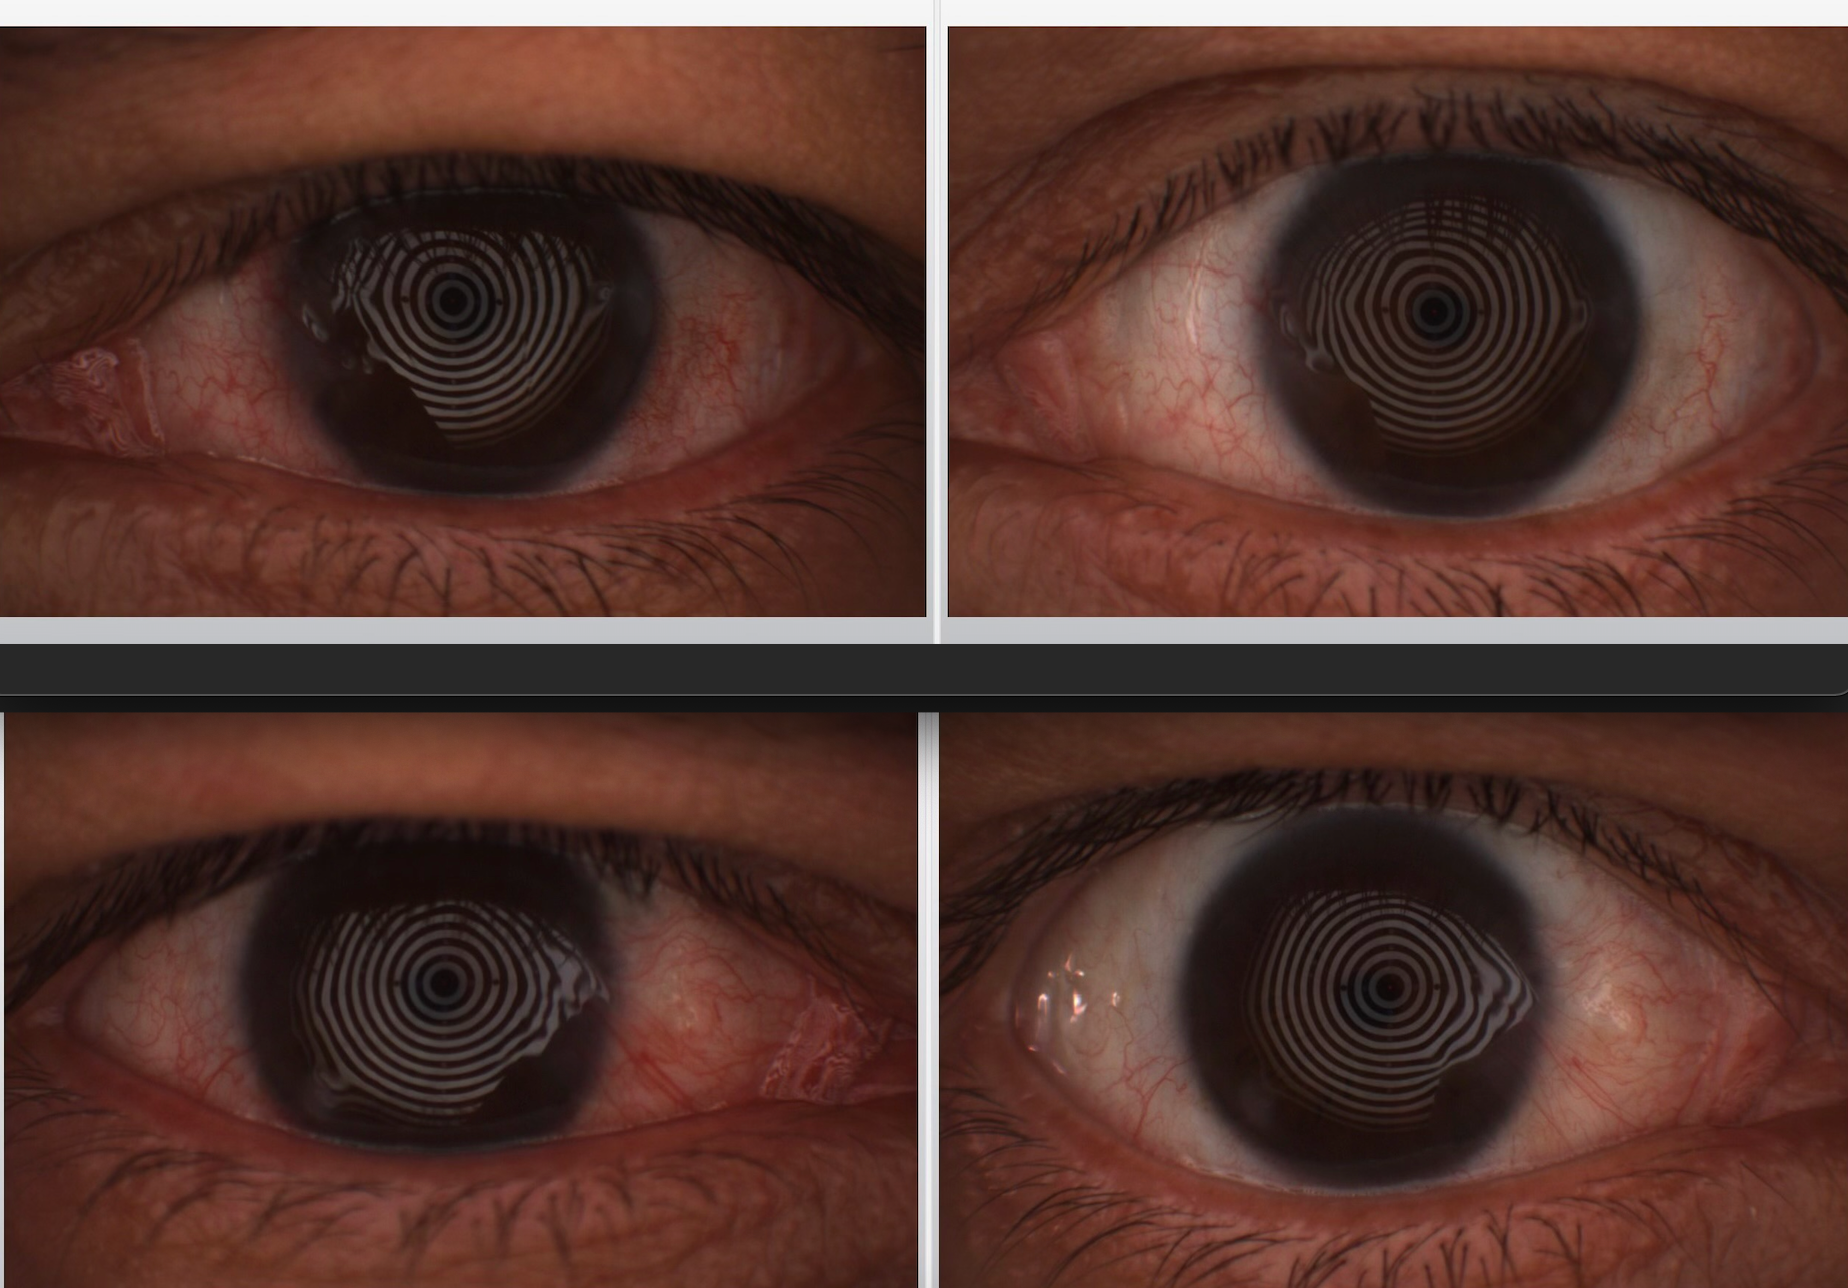 A patient experienced significant reduction in conjunctival redness after 4 treatments with OptiLight IPL. 